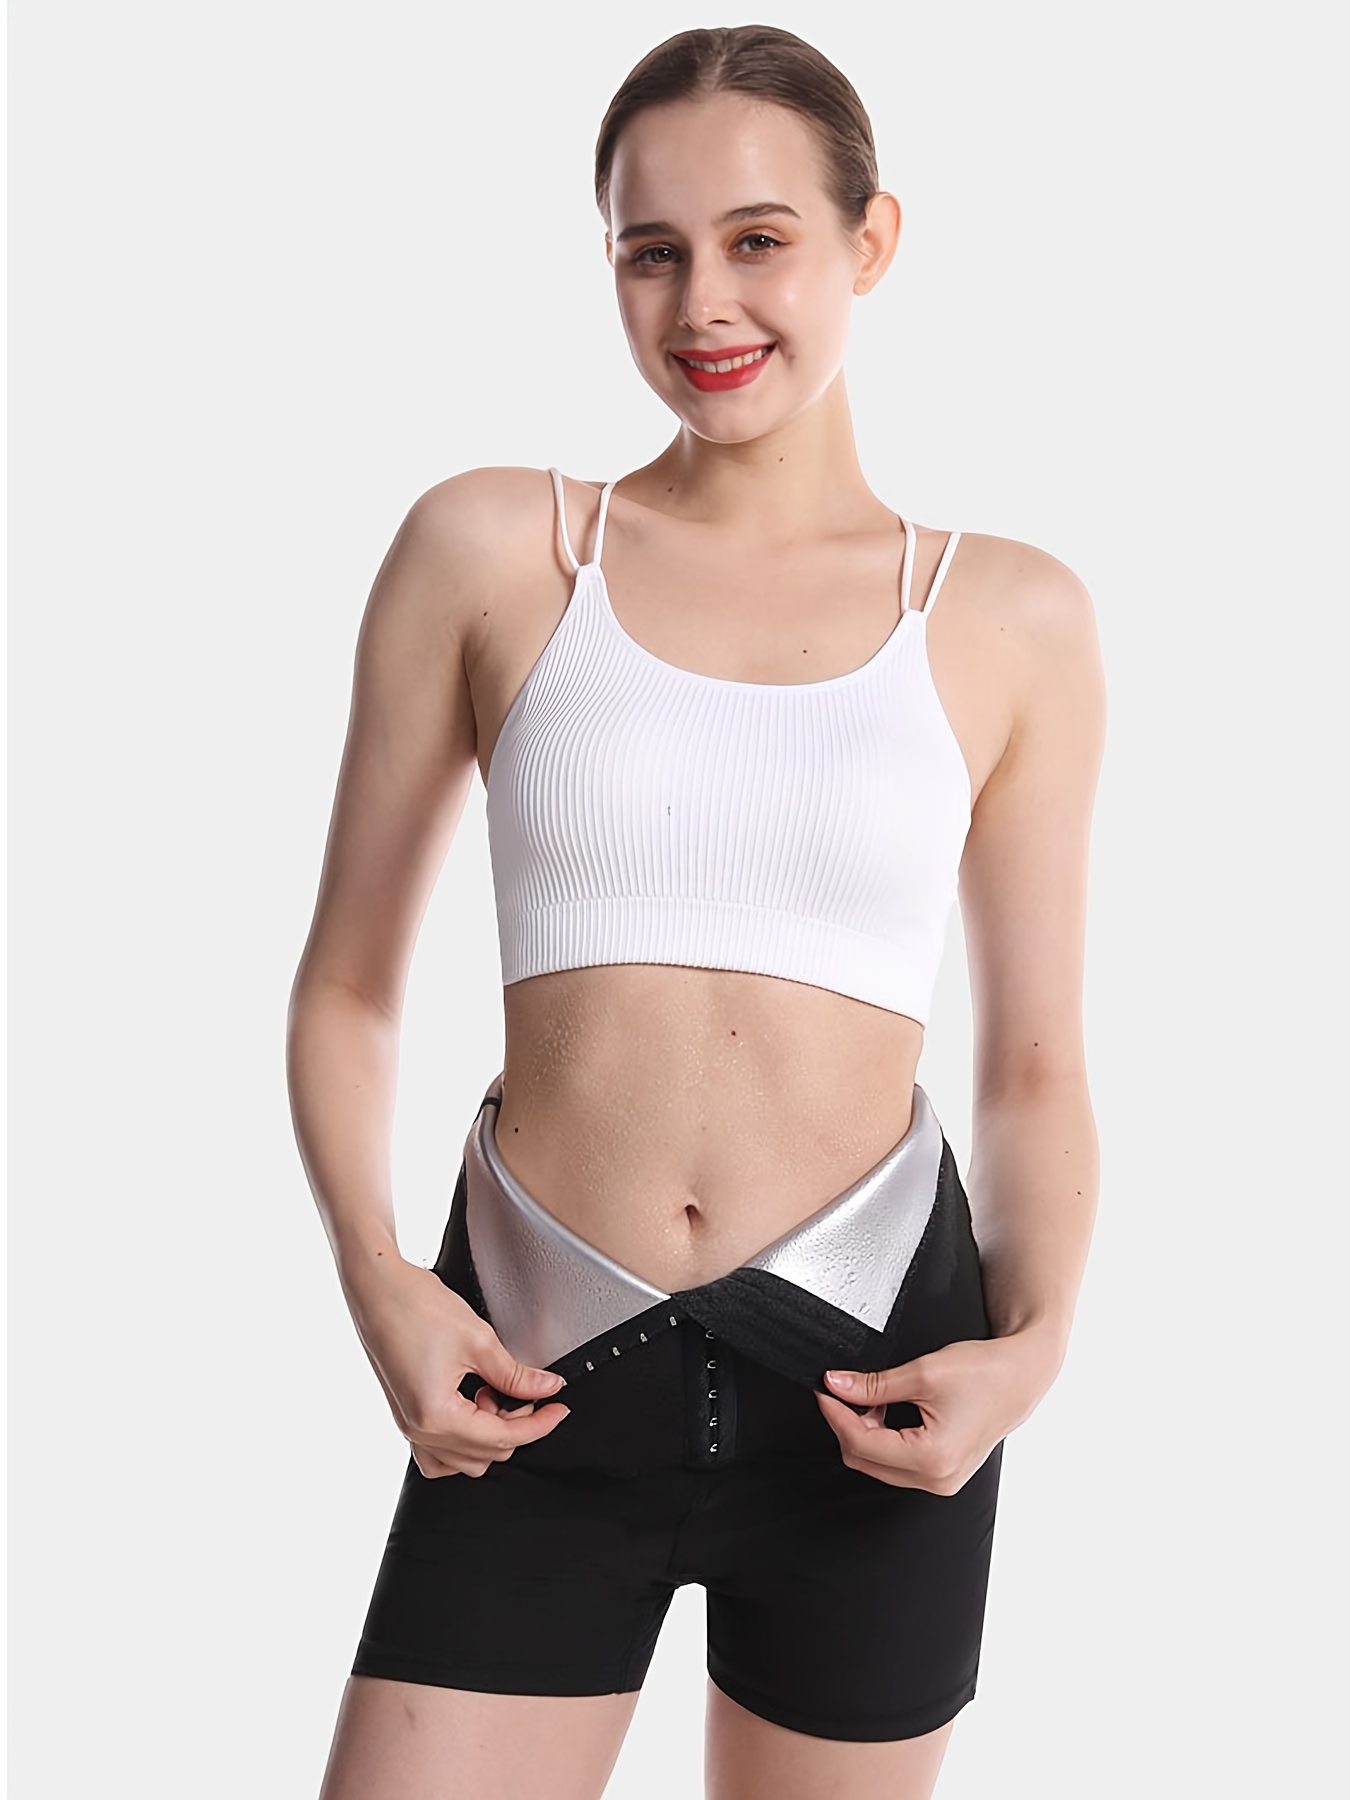 Invisible Crossover Abdominal Shaping Waist Trainer Corset Yoga Sports